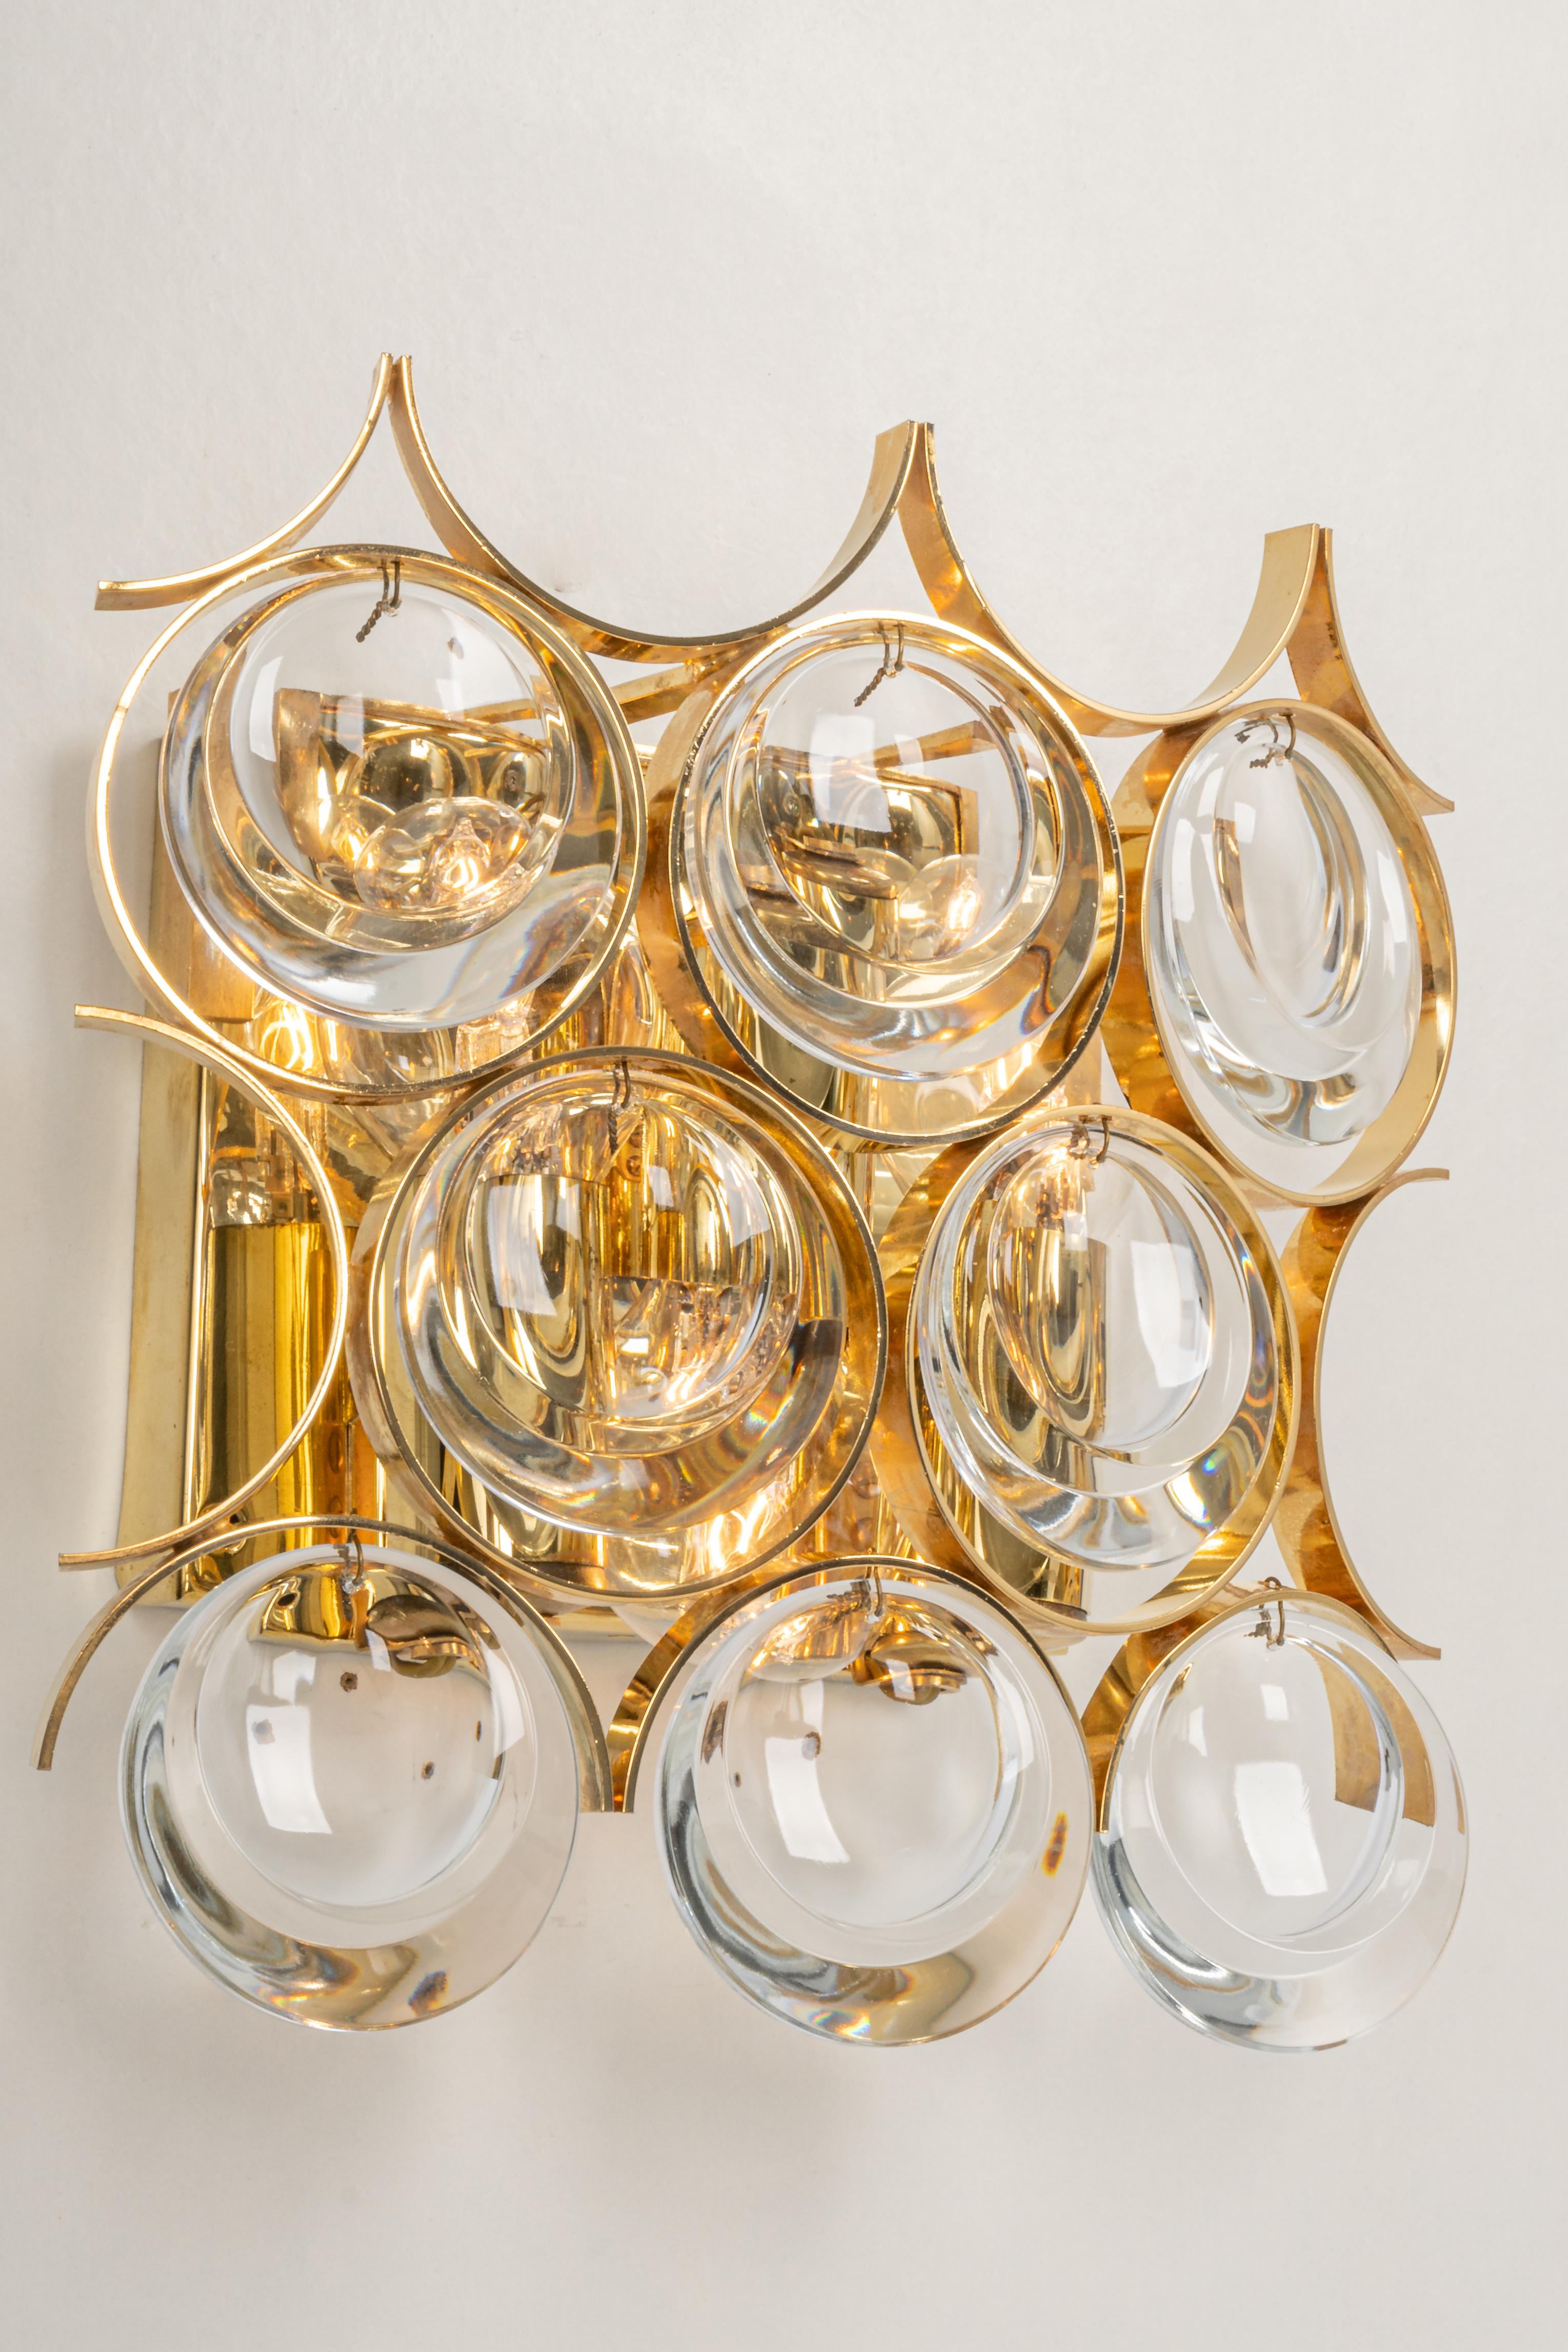 Mid-20th Century 1 of 3 Pairs of Crystal Wall Lights, Sciolari Design, Palwa, Germany, 1960s For Sale